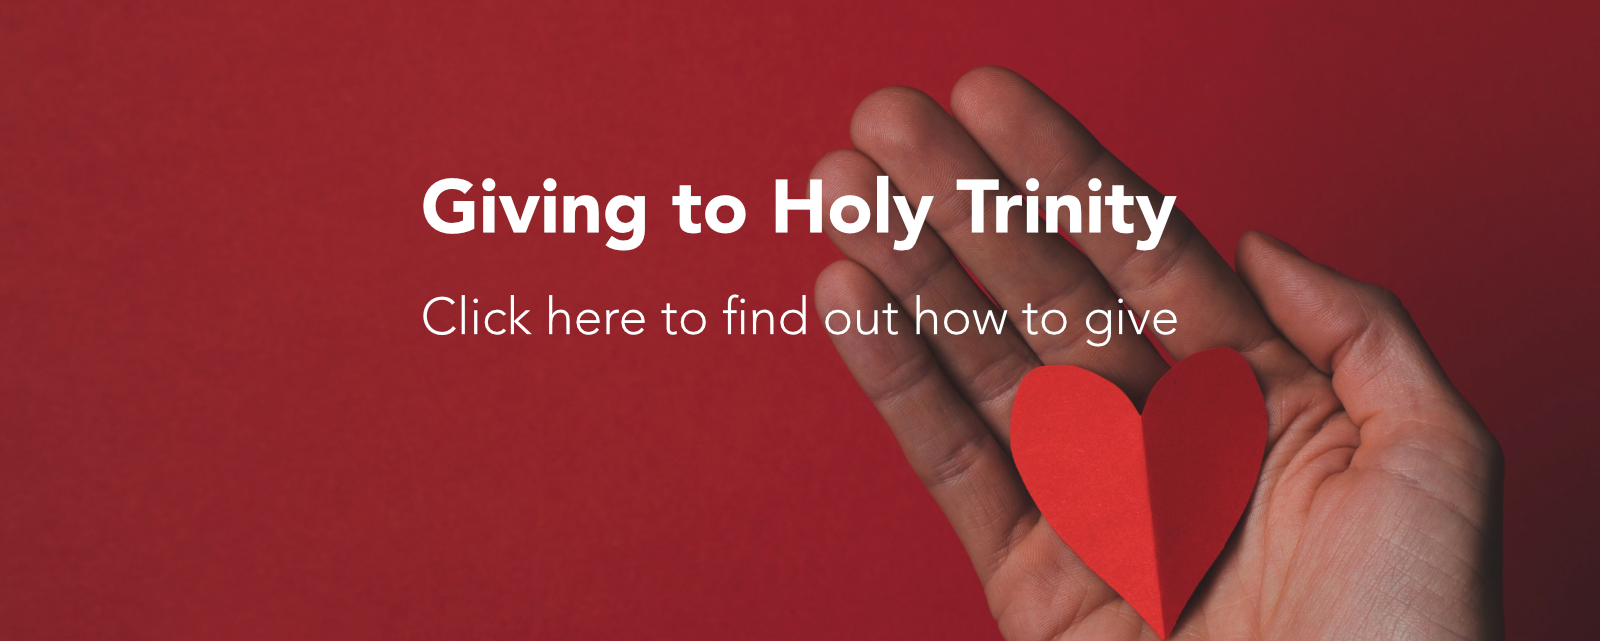 Giving to Holy Trinity**Click here to find out how to give